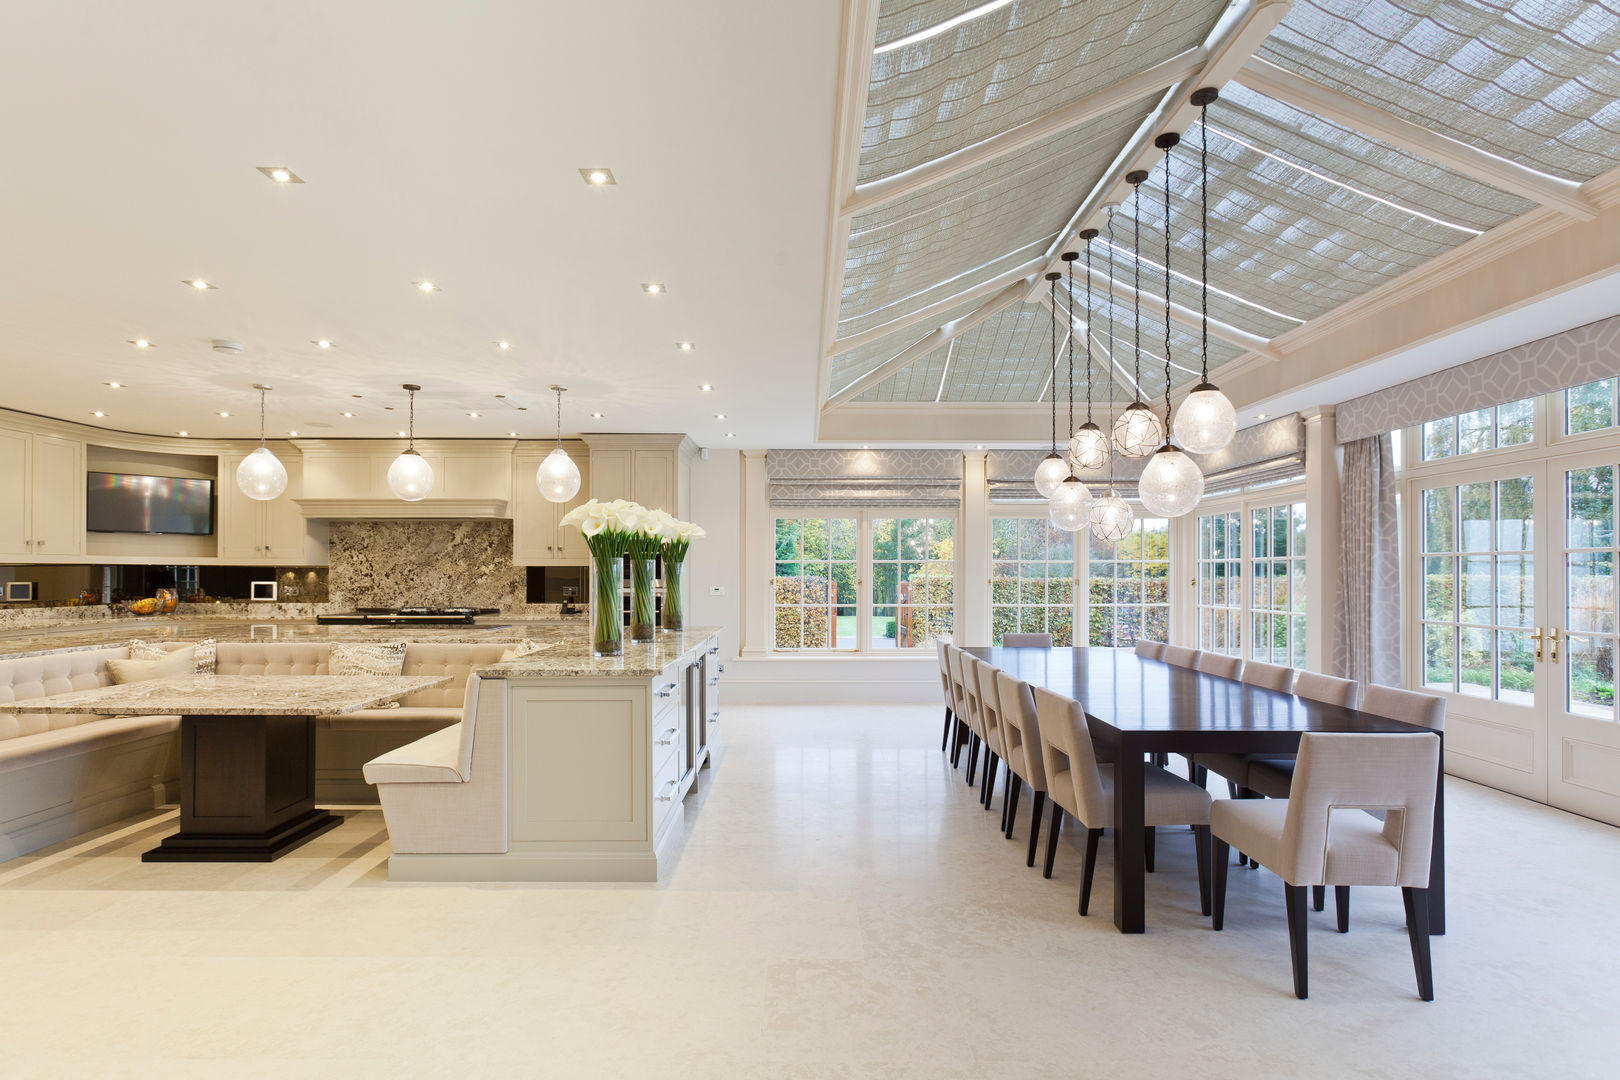 Georgian Orangery opens up the kitchen to include dining space Vale Garden Houses Conservatory